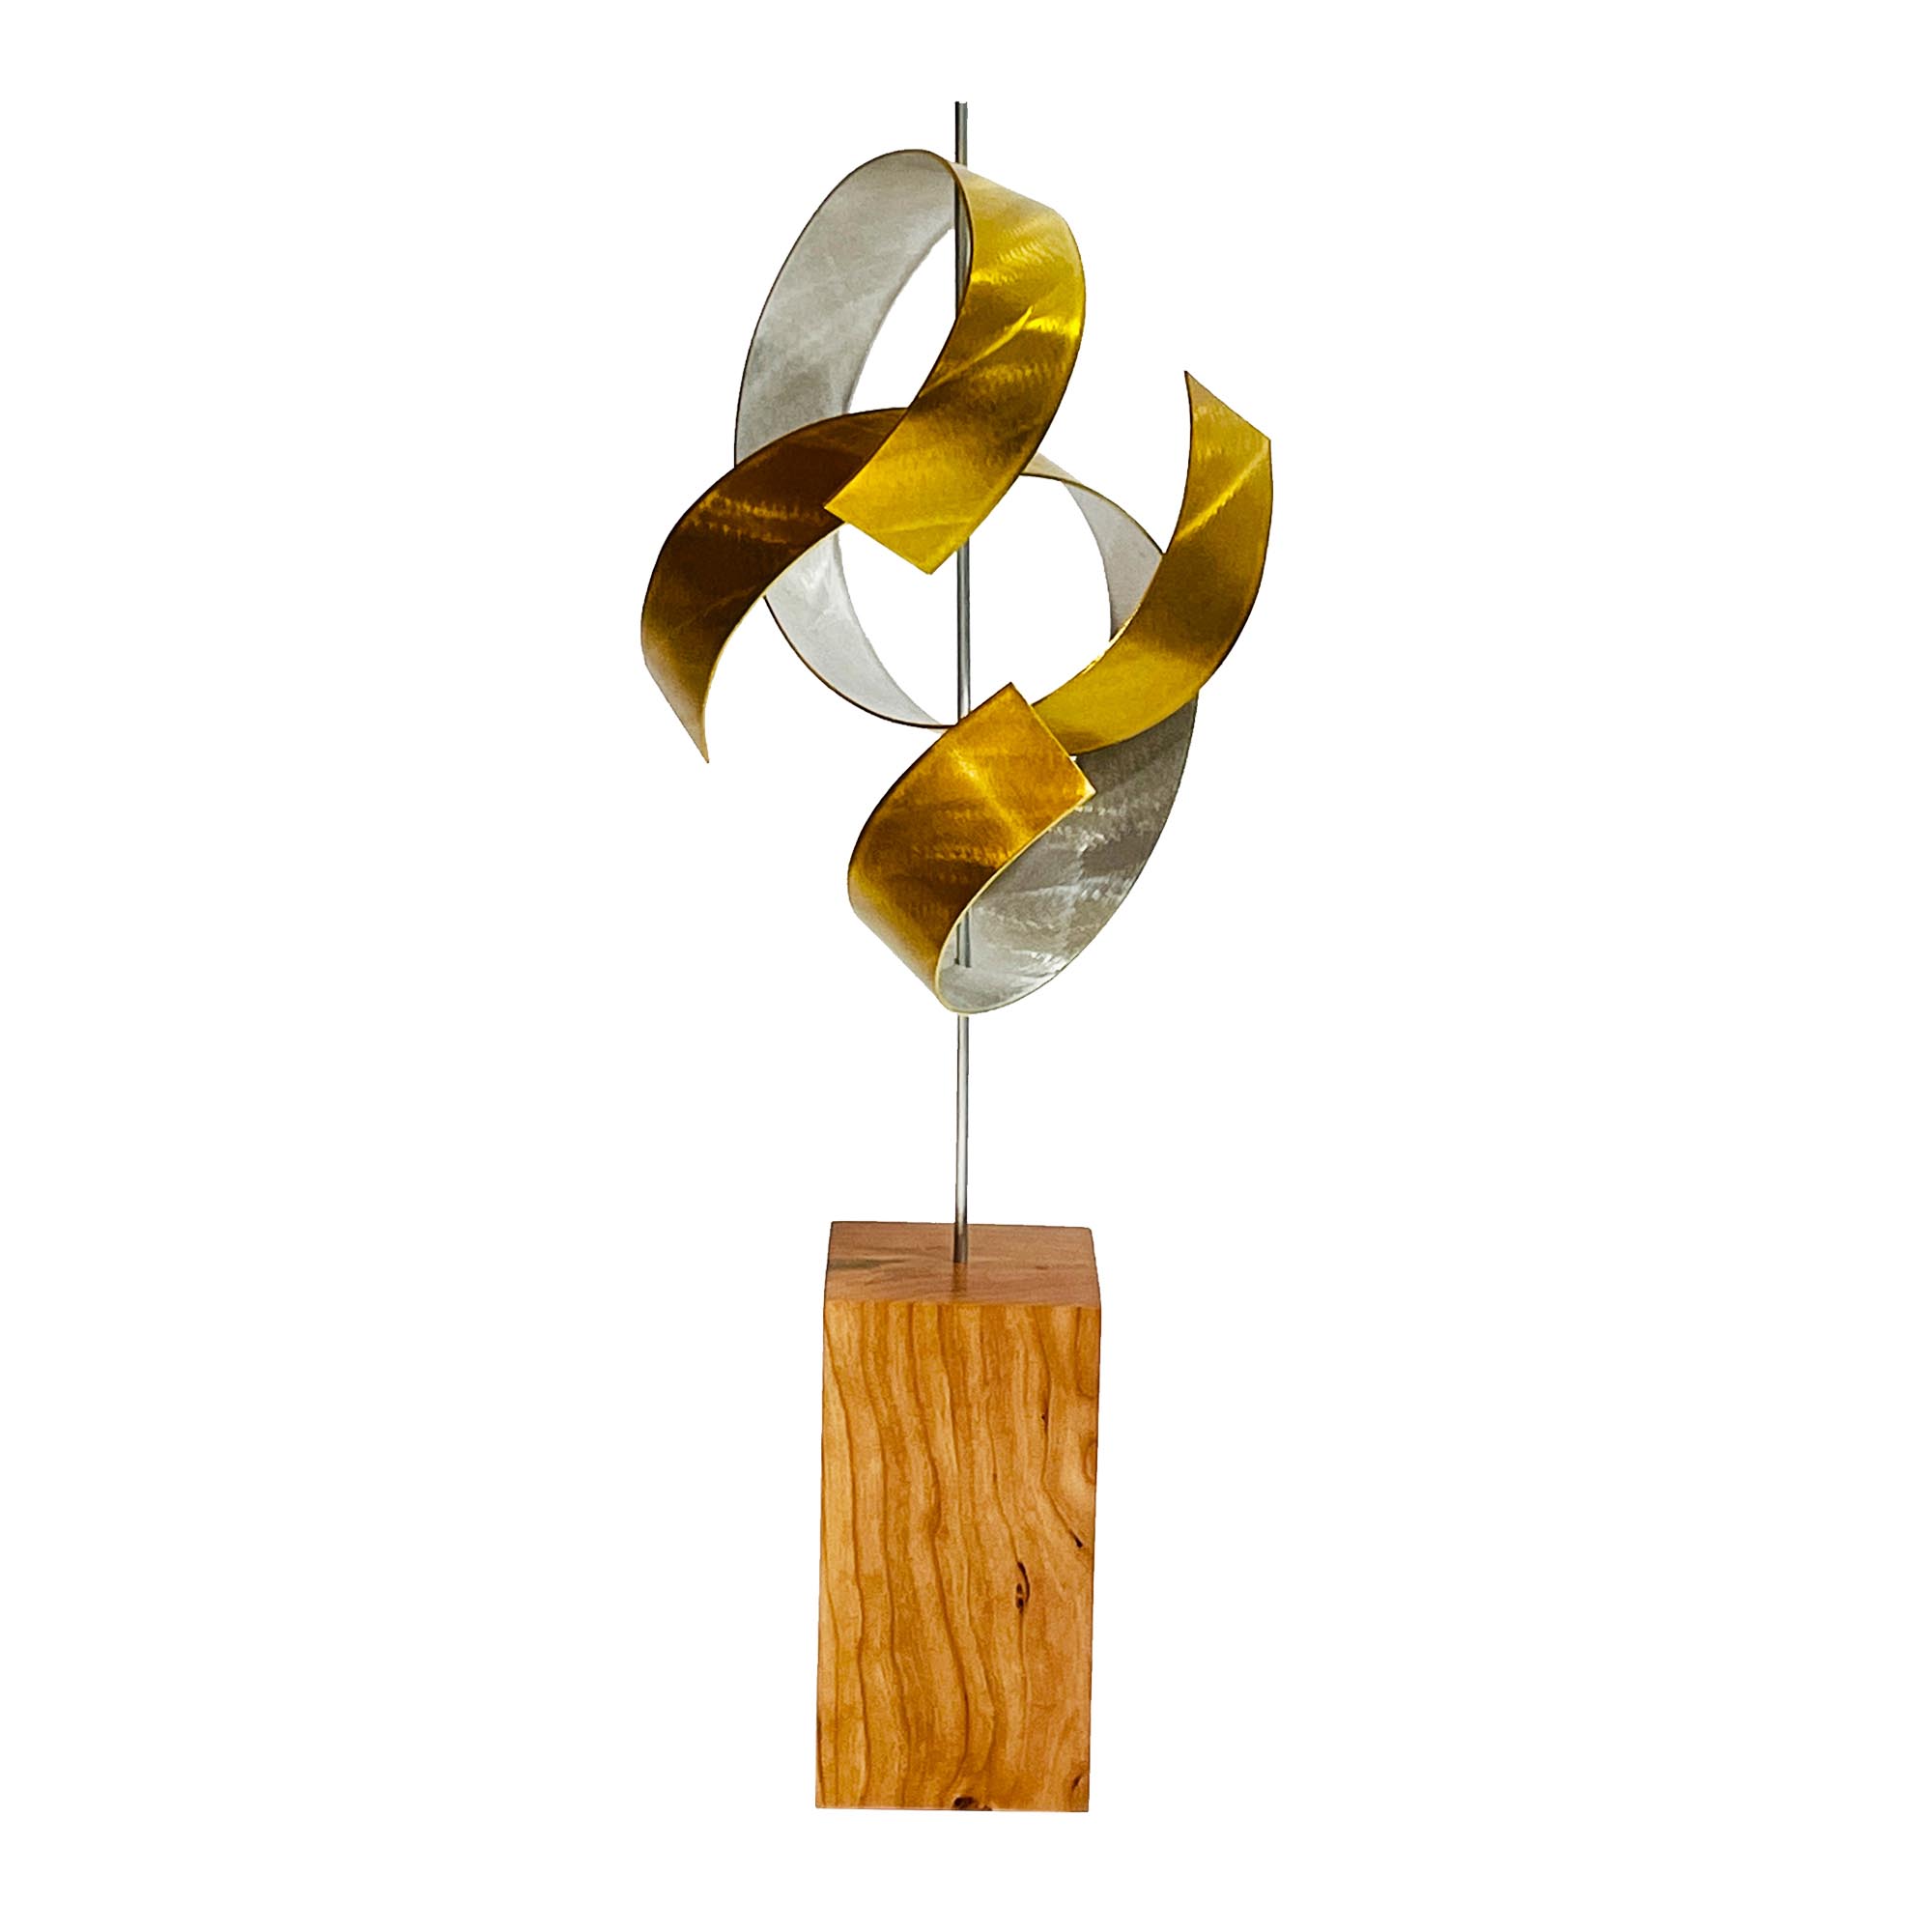 Jackson Wright 'Rings Gold Cherry' 10in x 23in Contemporary Style Abstract Wood Sculpture